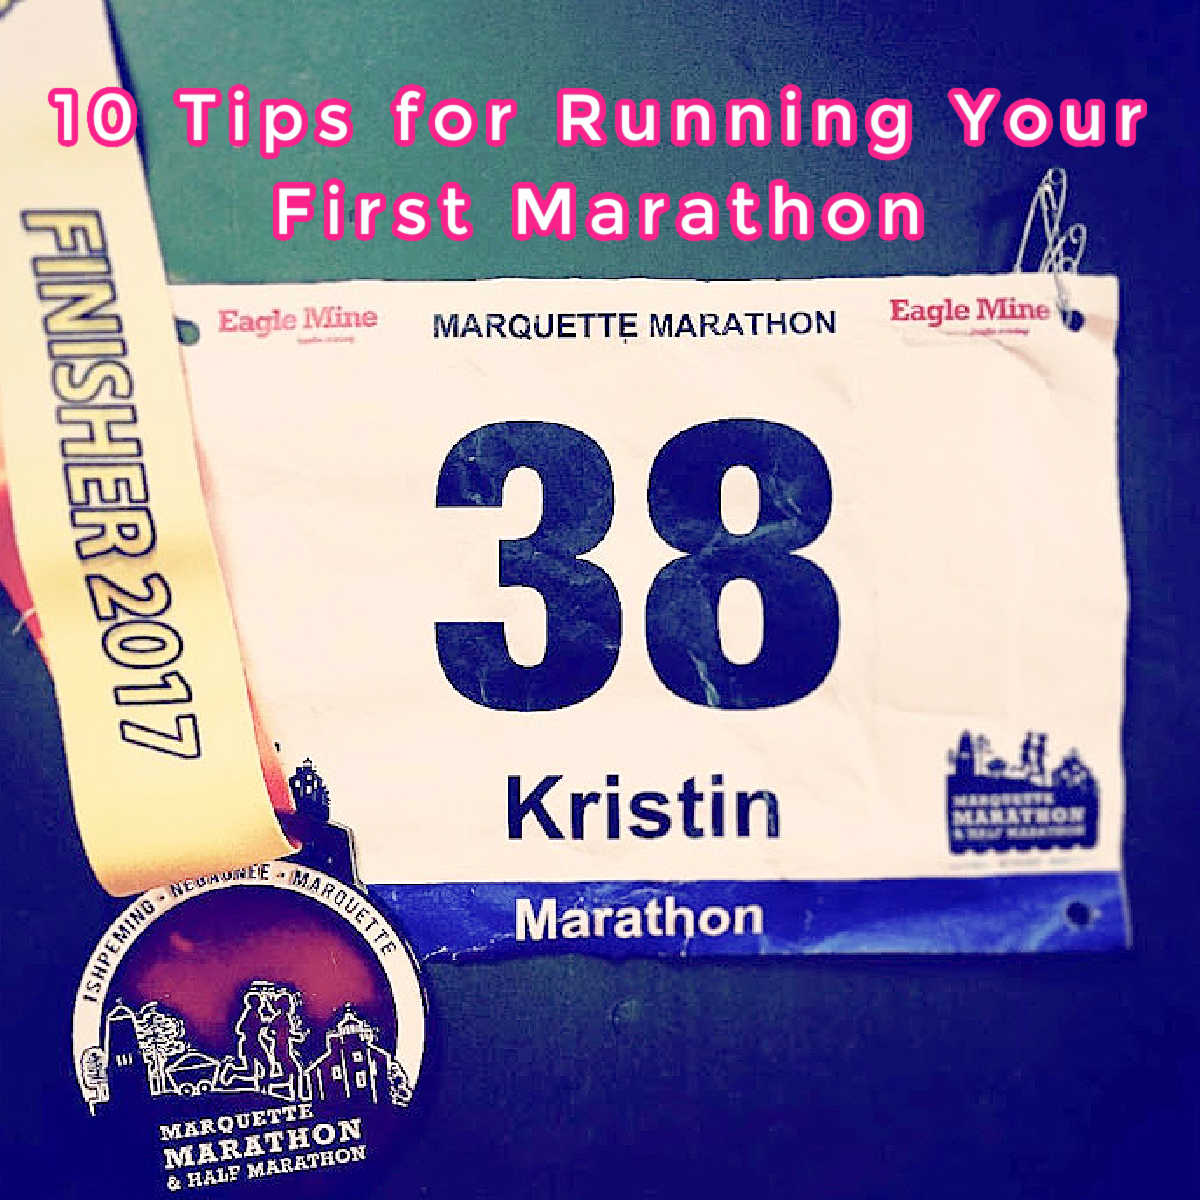 10 Tips for Running Your First Marathon